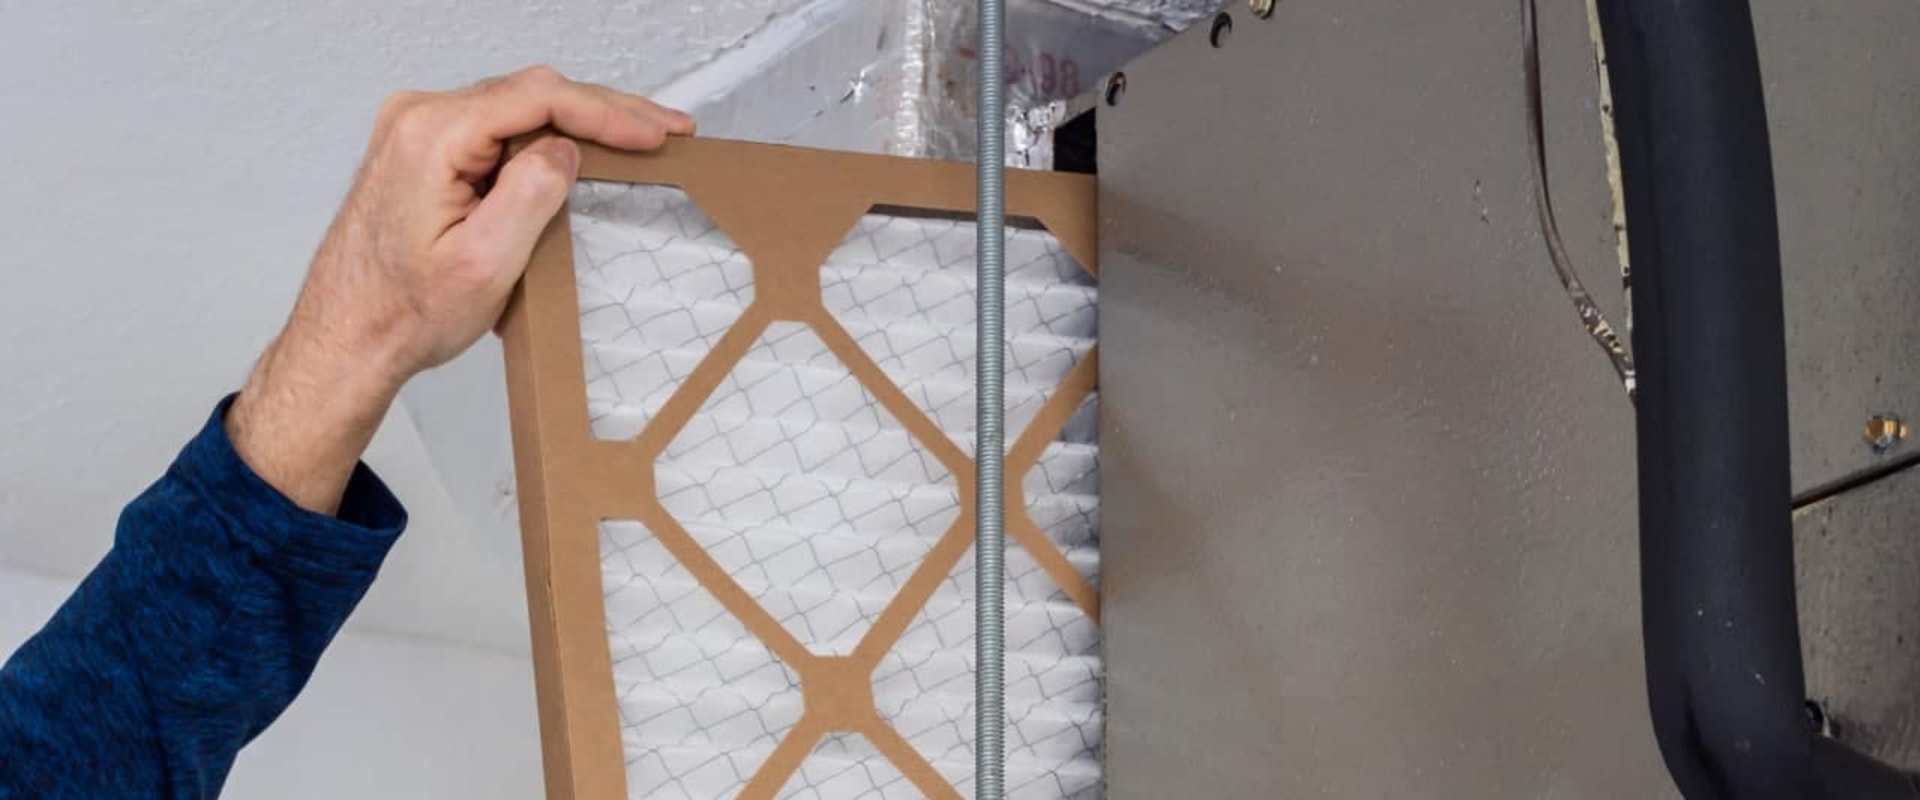 Keep Your Home Fresh With a 16x24x1 Home Furnace Air Filter